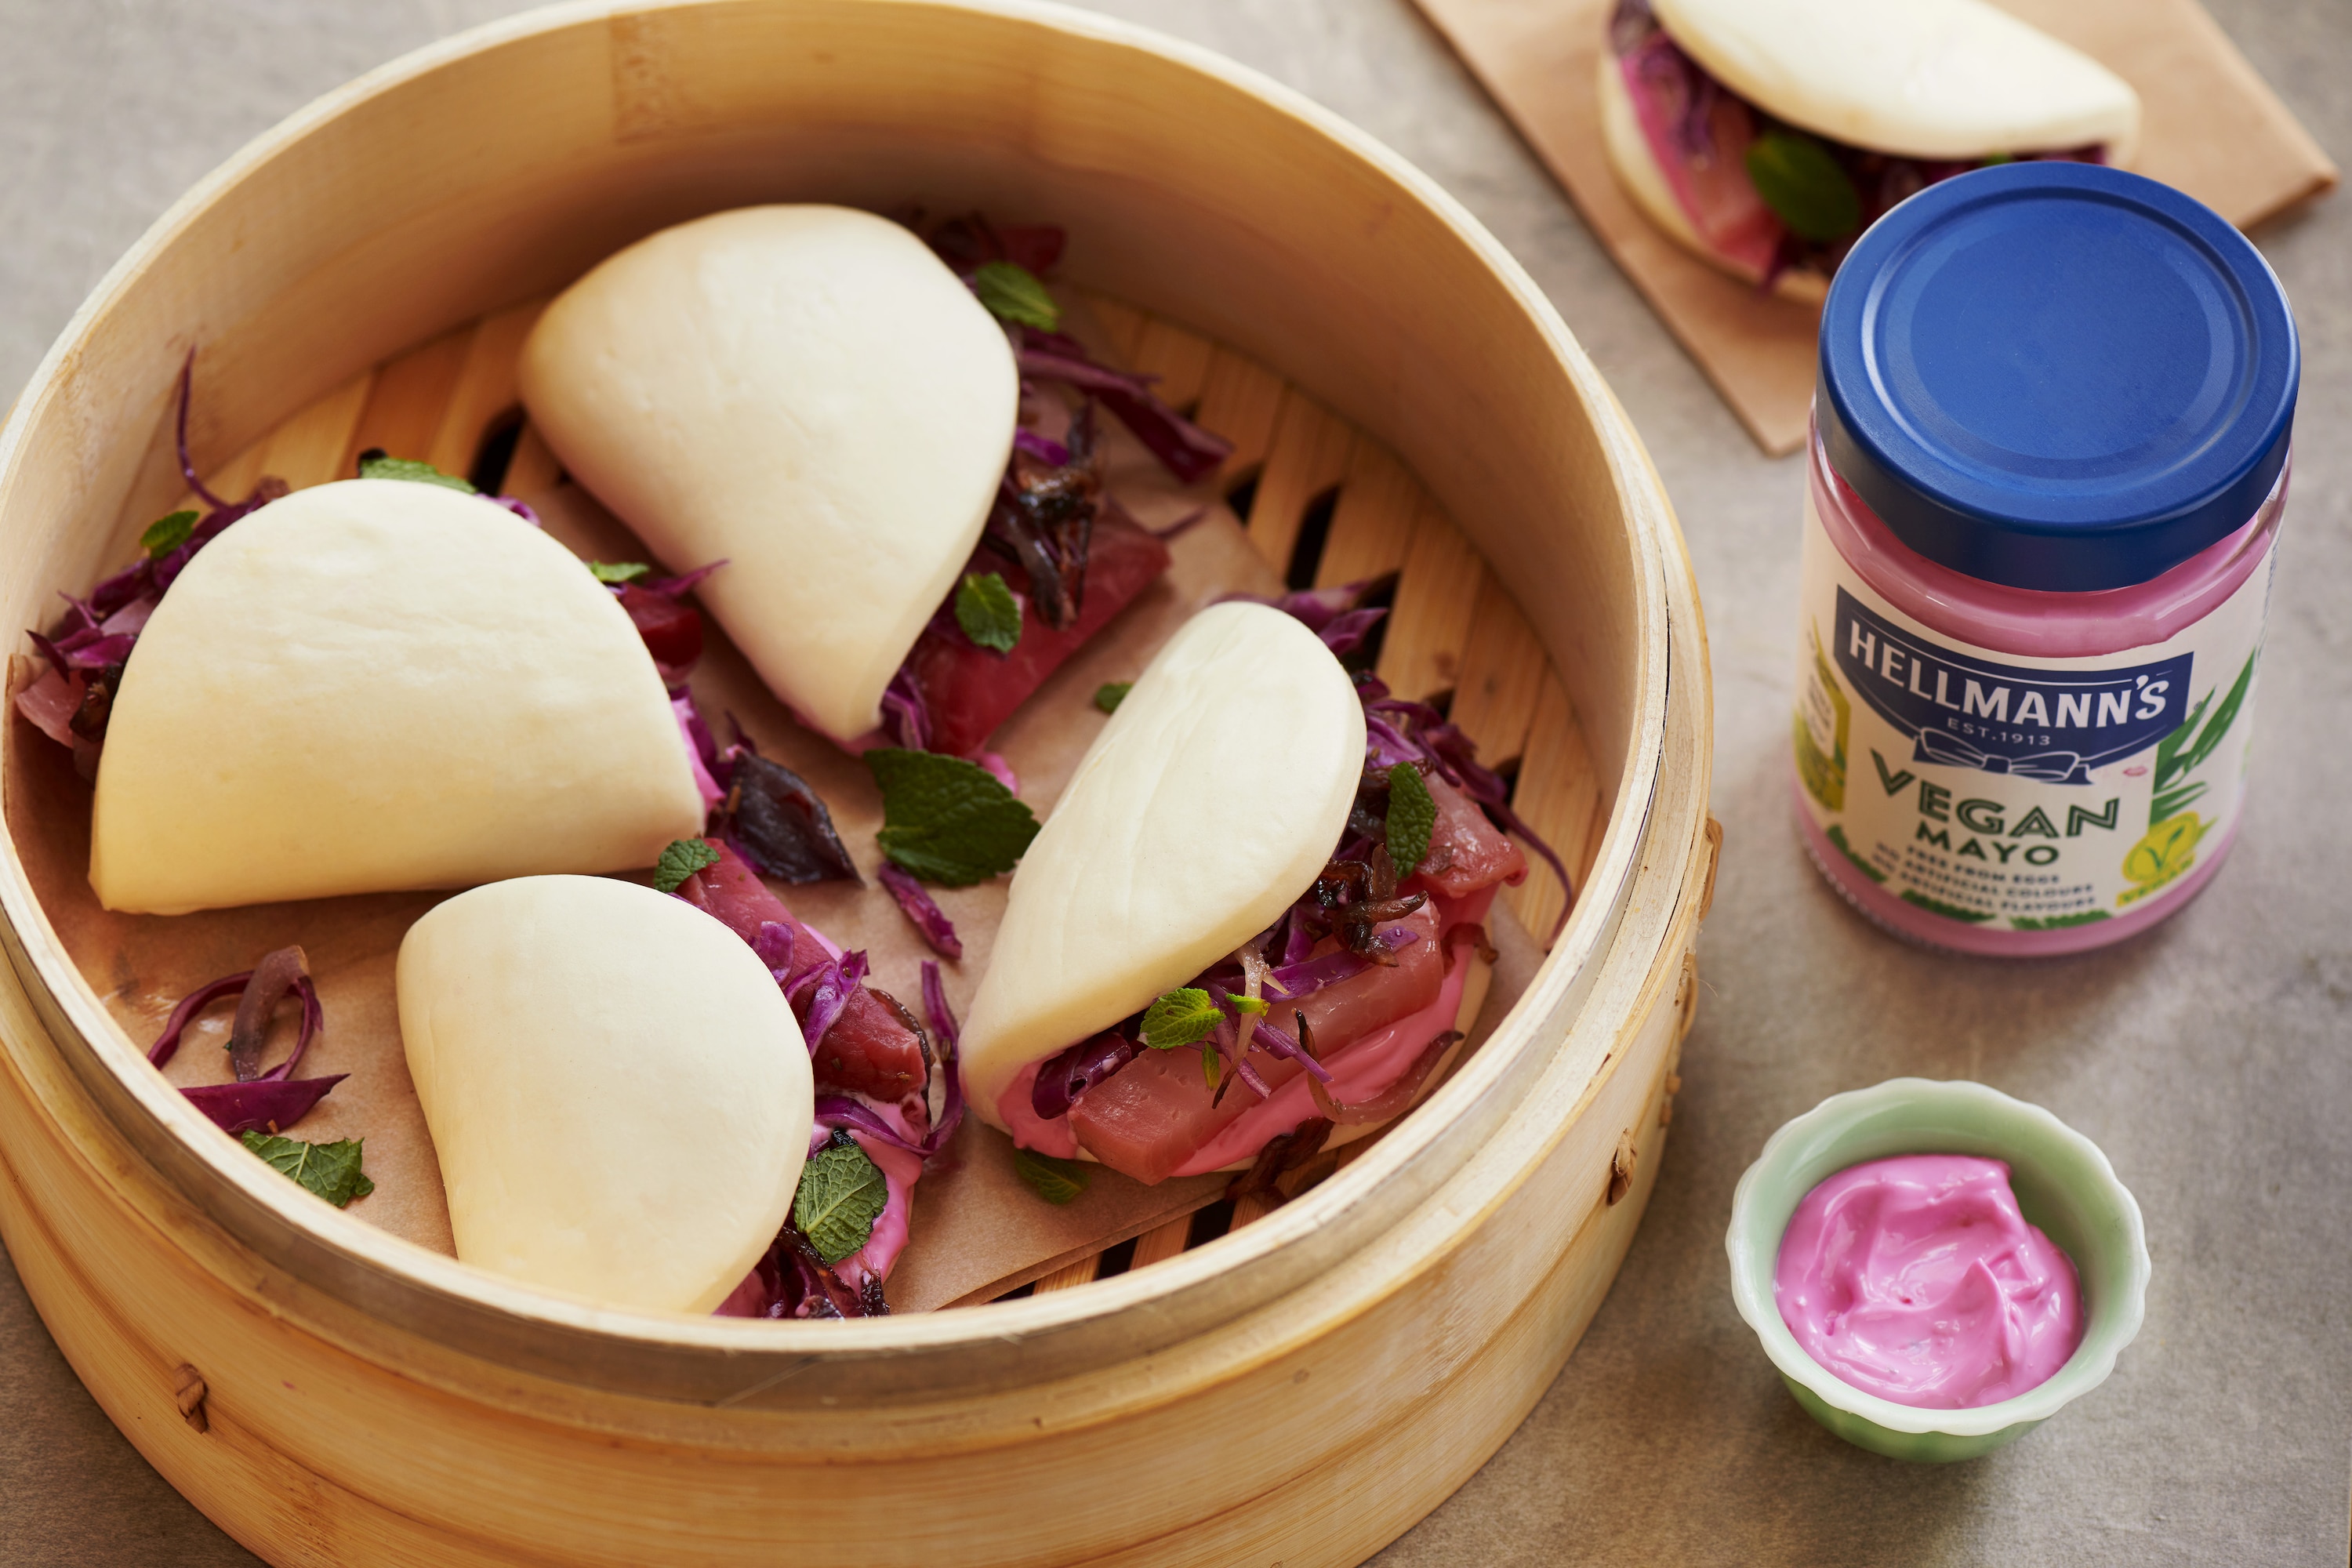 Candied beetroot bao